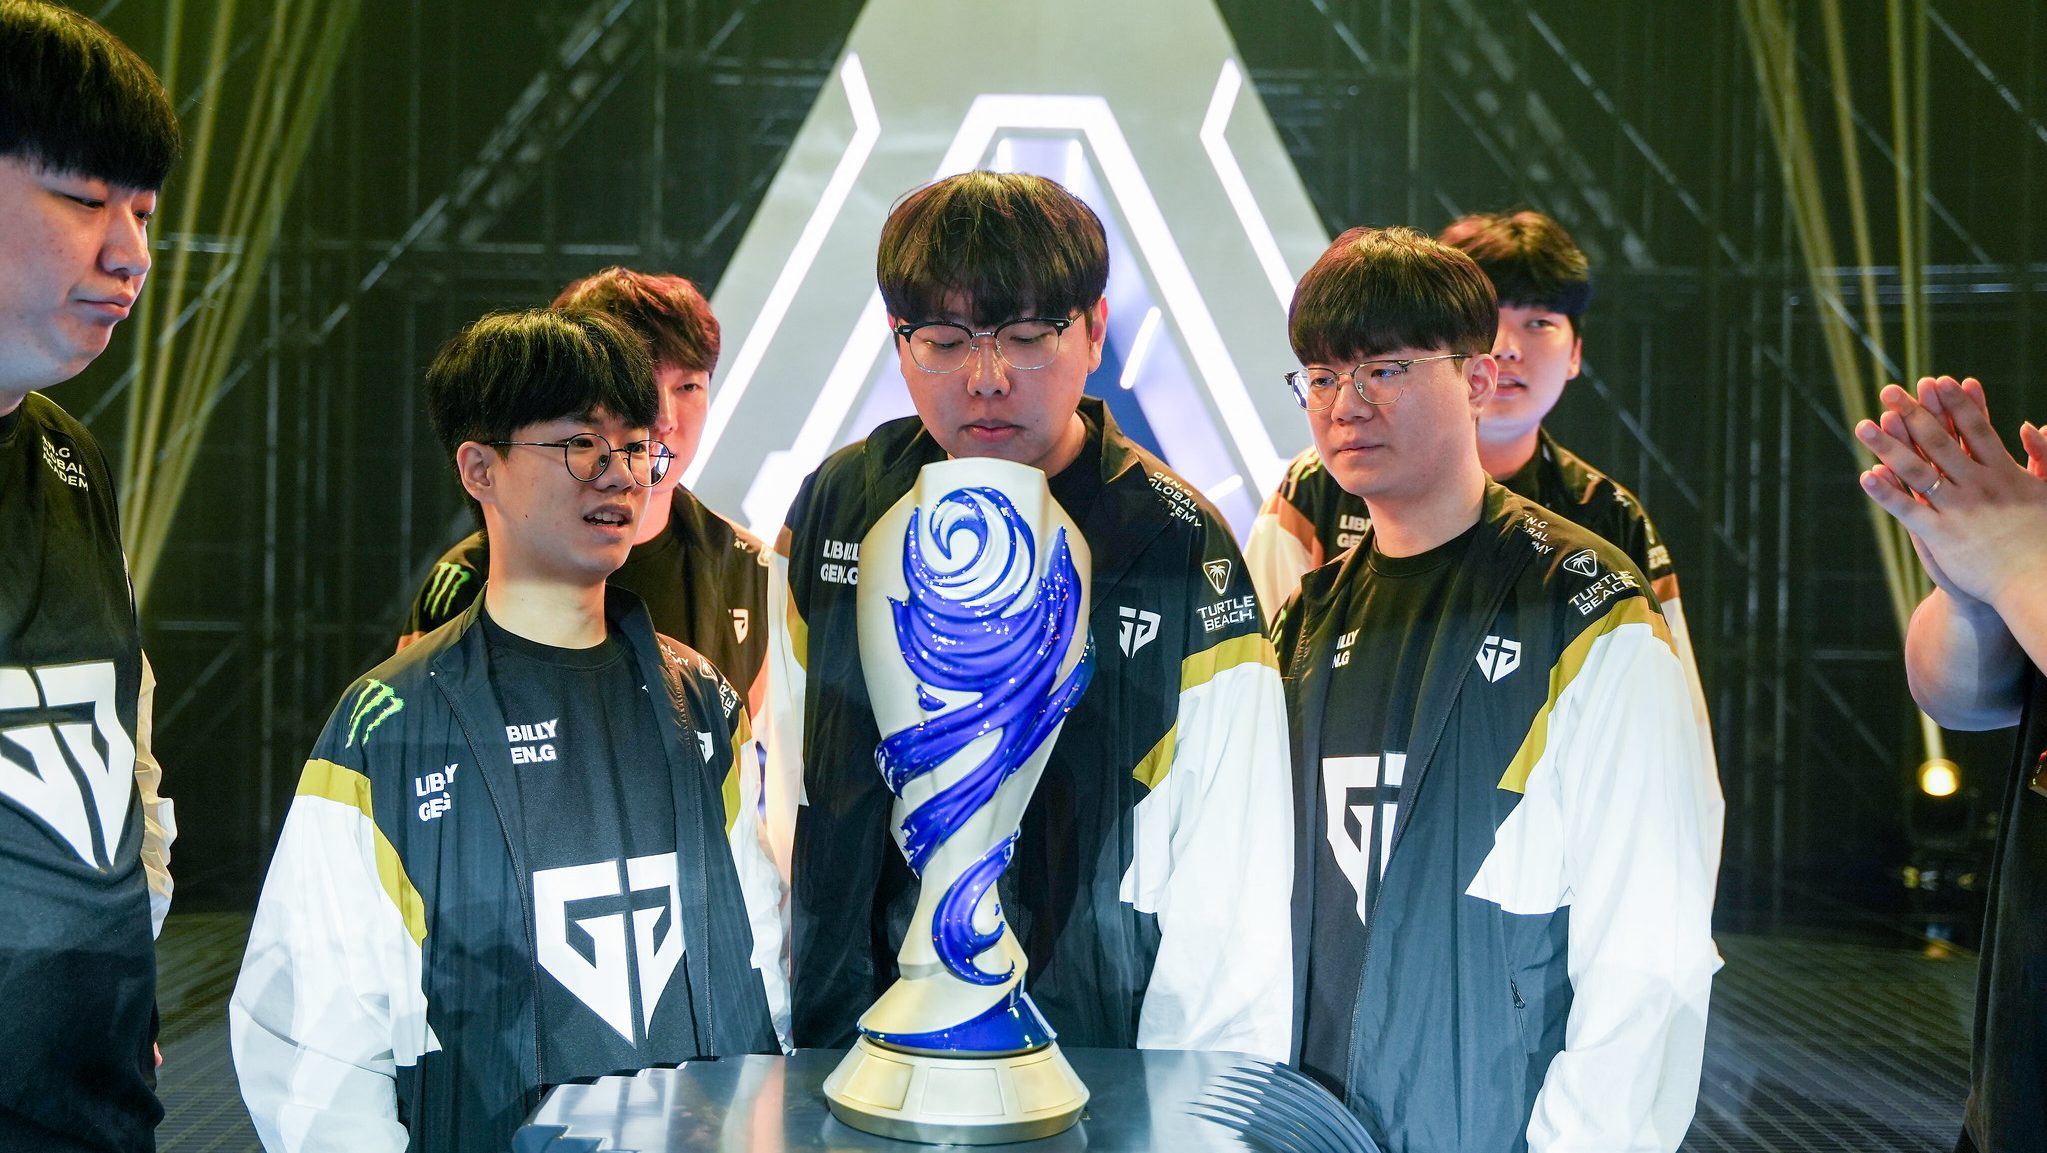 Gen.G Munchkin on building such a dominant team “Players who are hungry will be more driven to work hard.”